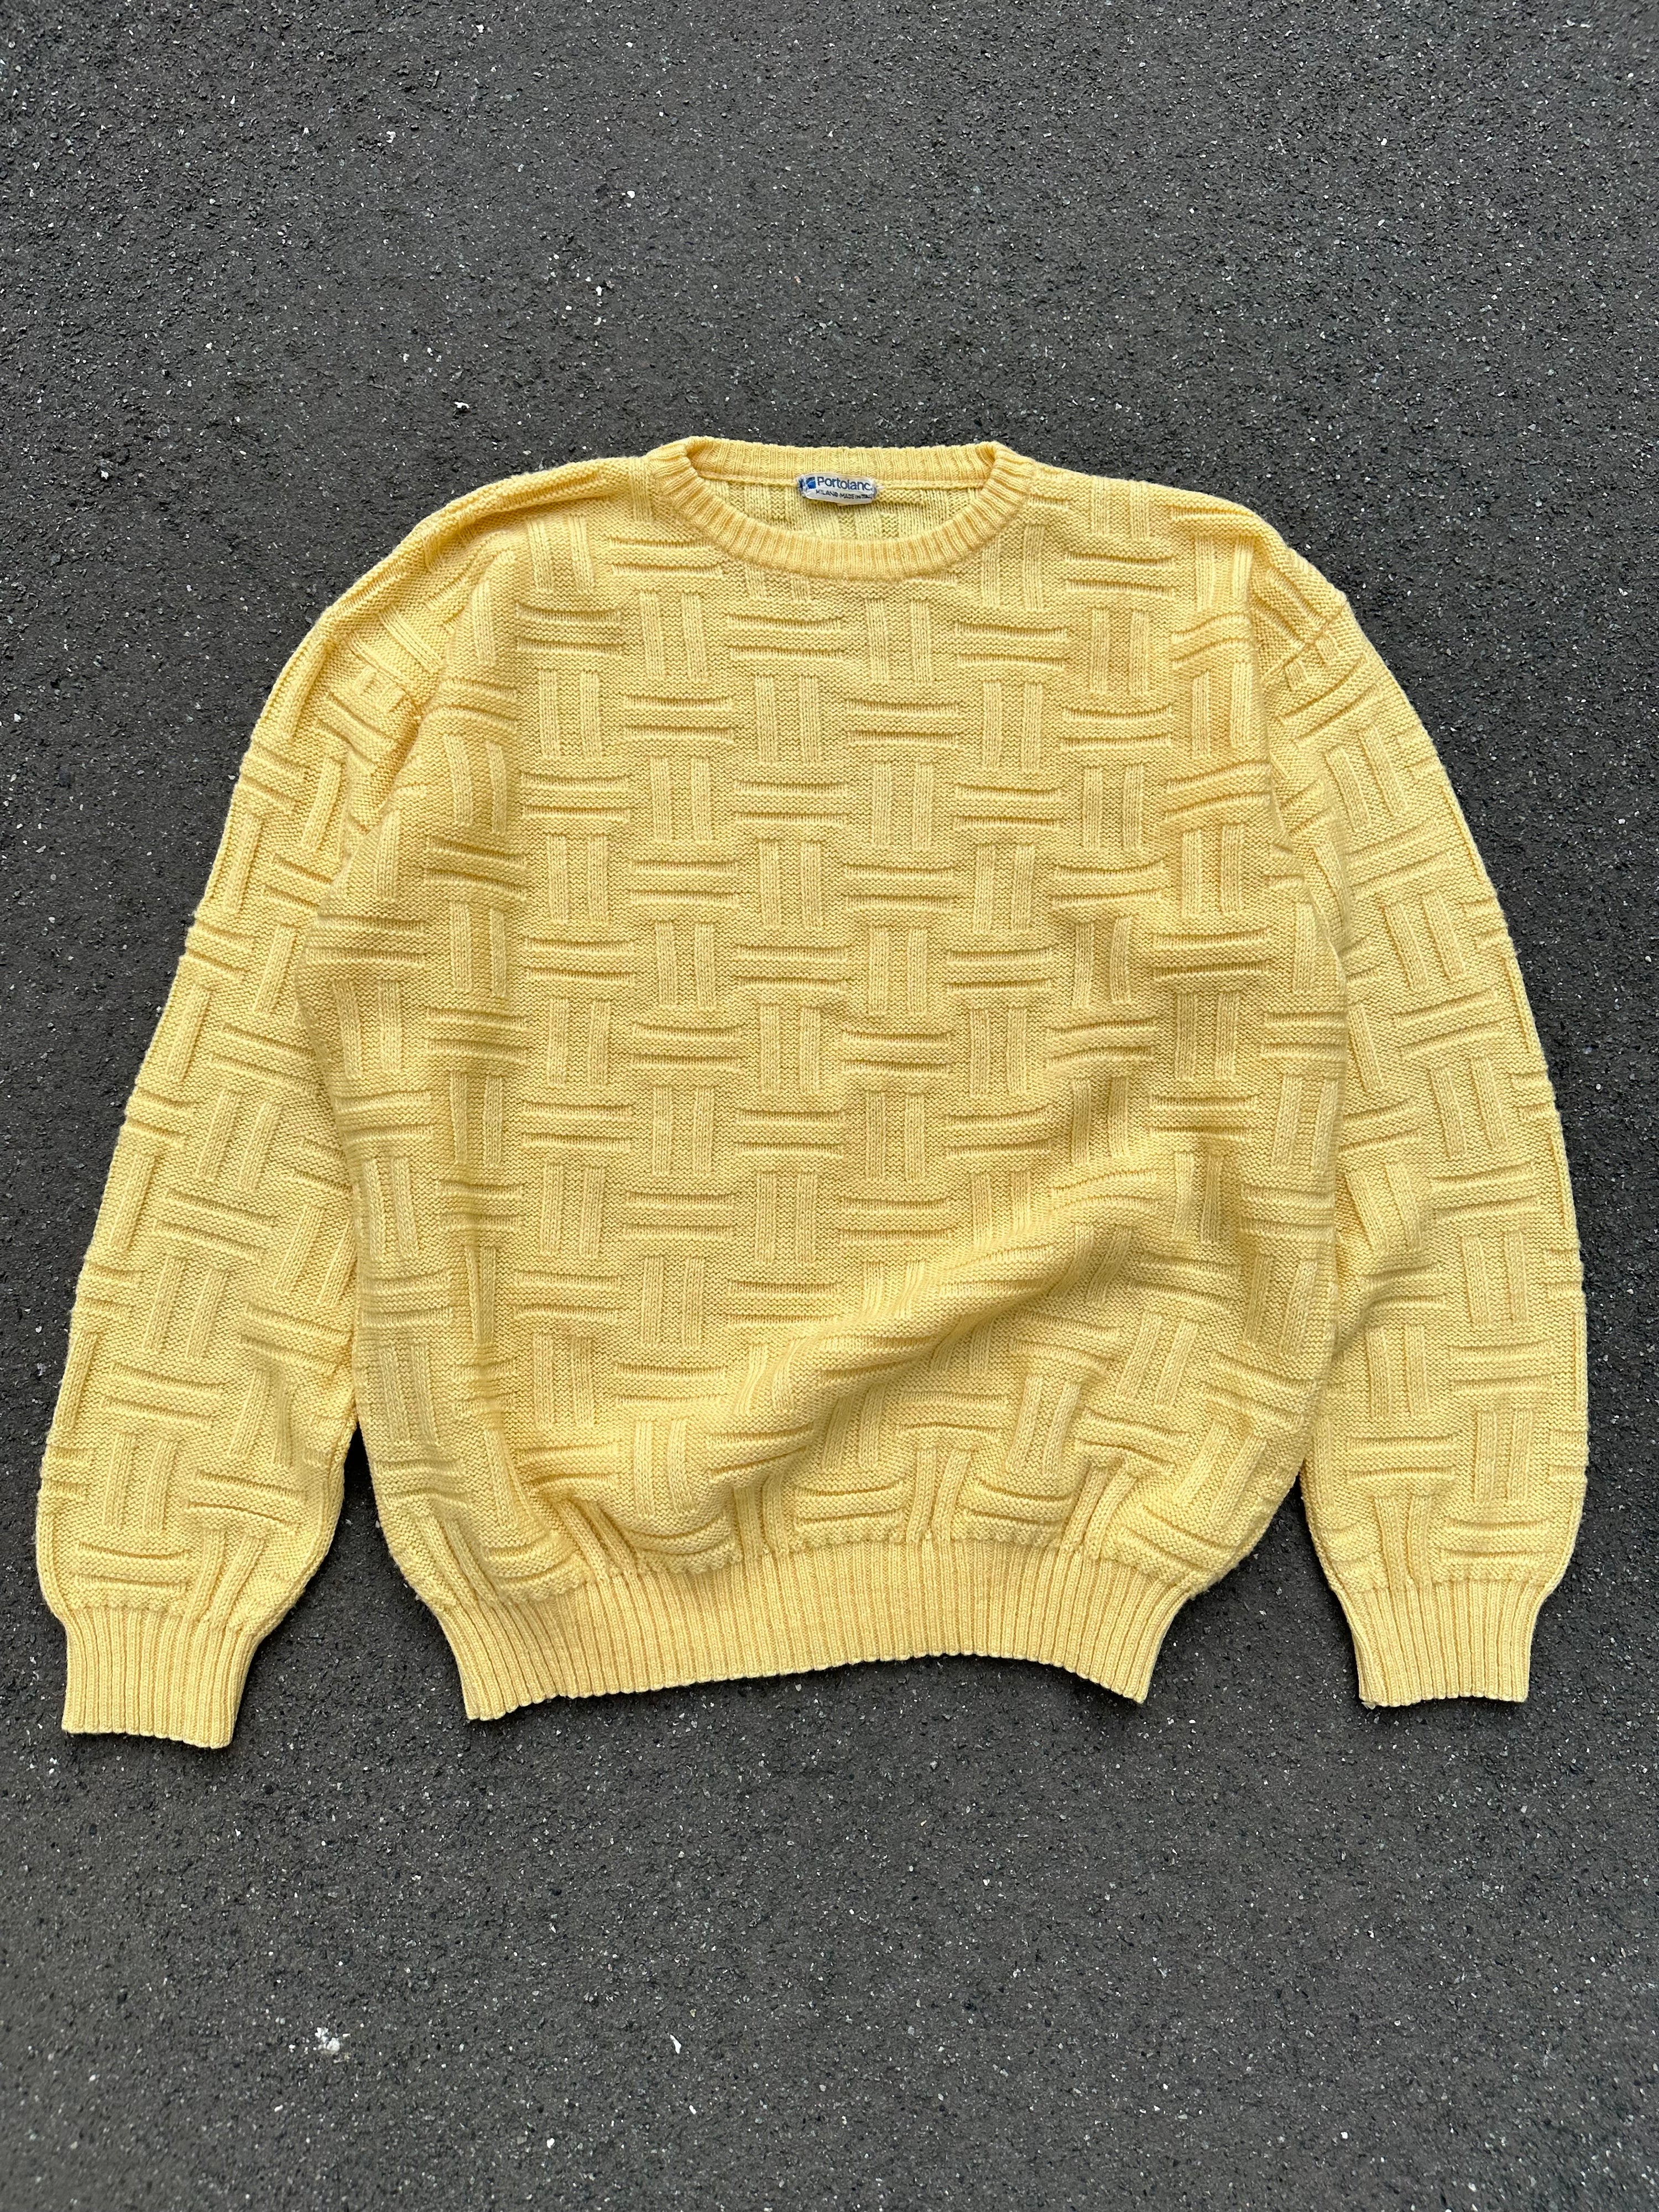 Vintage 80s Made in Italy Knit Sweater (XL)